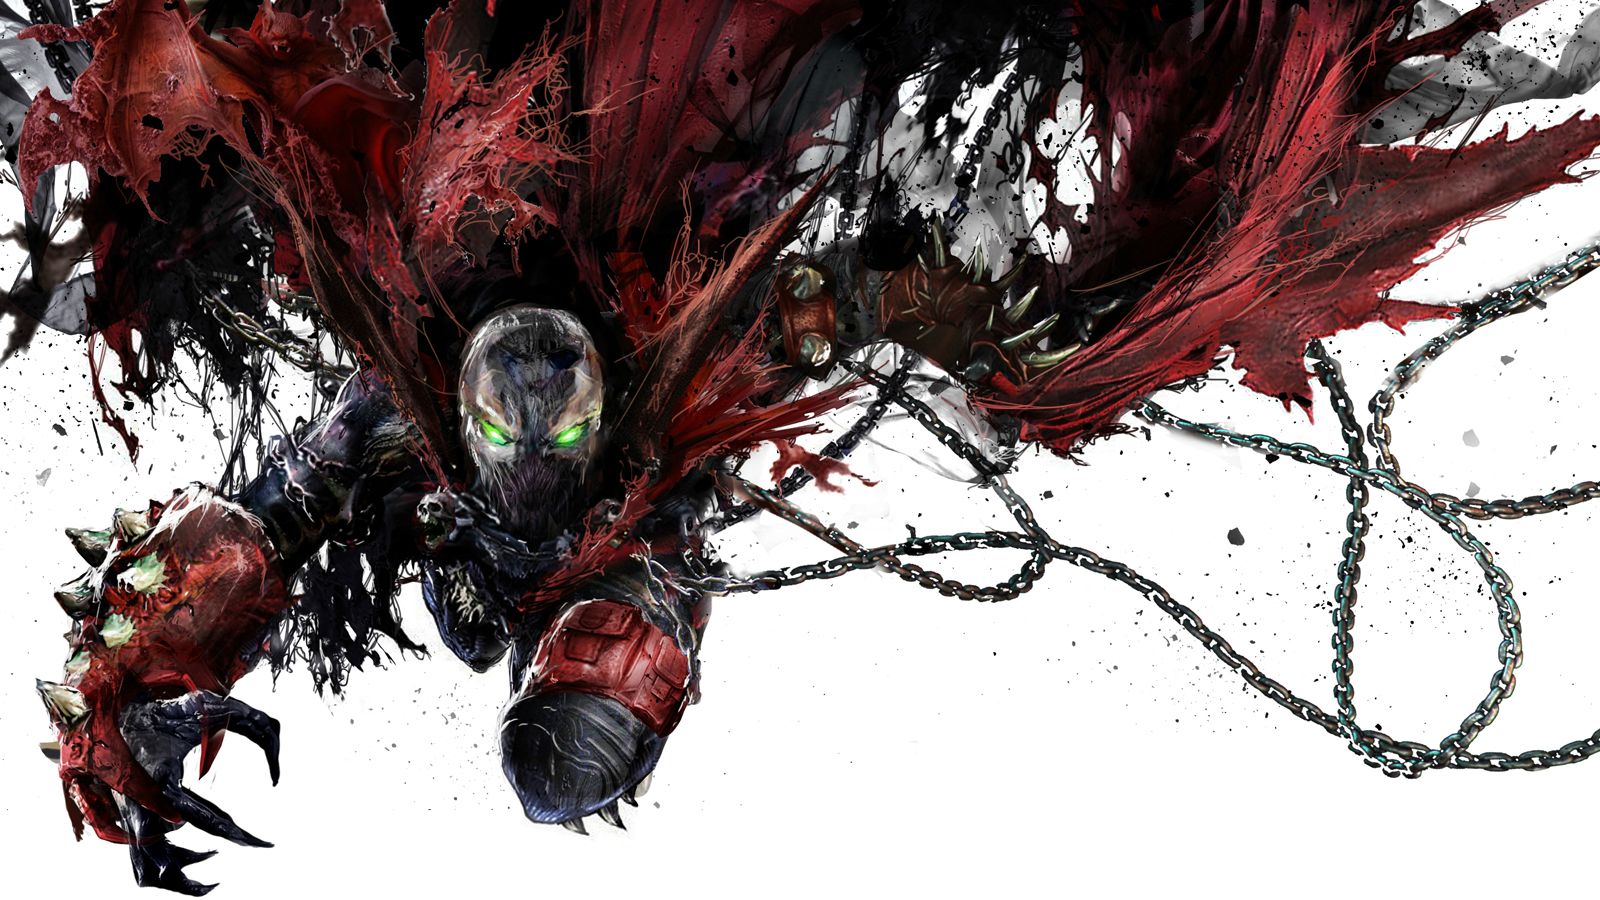 Movie Monday: Spawn – Isn't it Time for a Remake? | The geekout-let